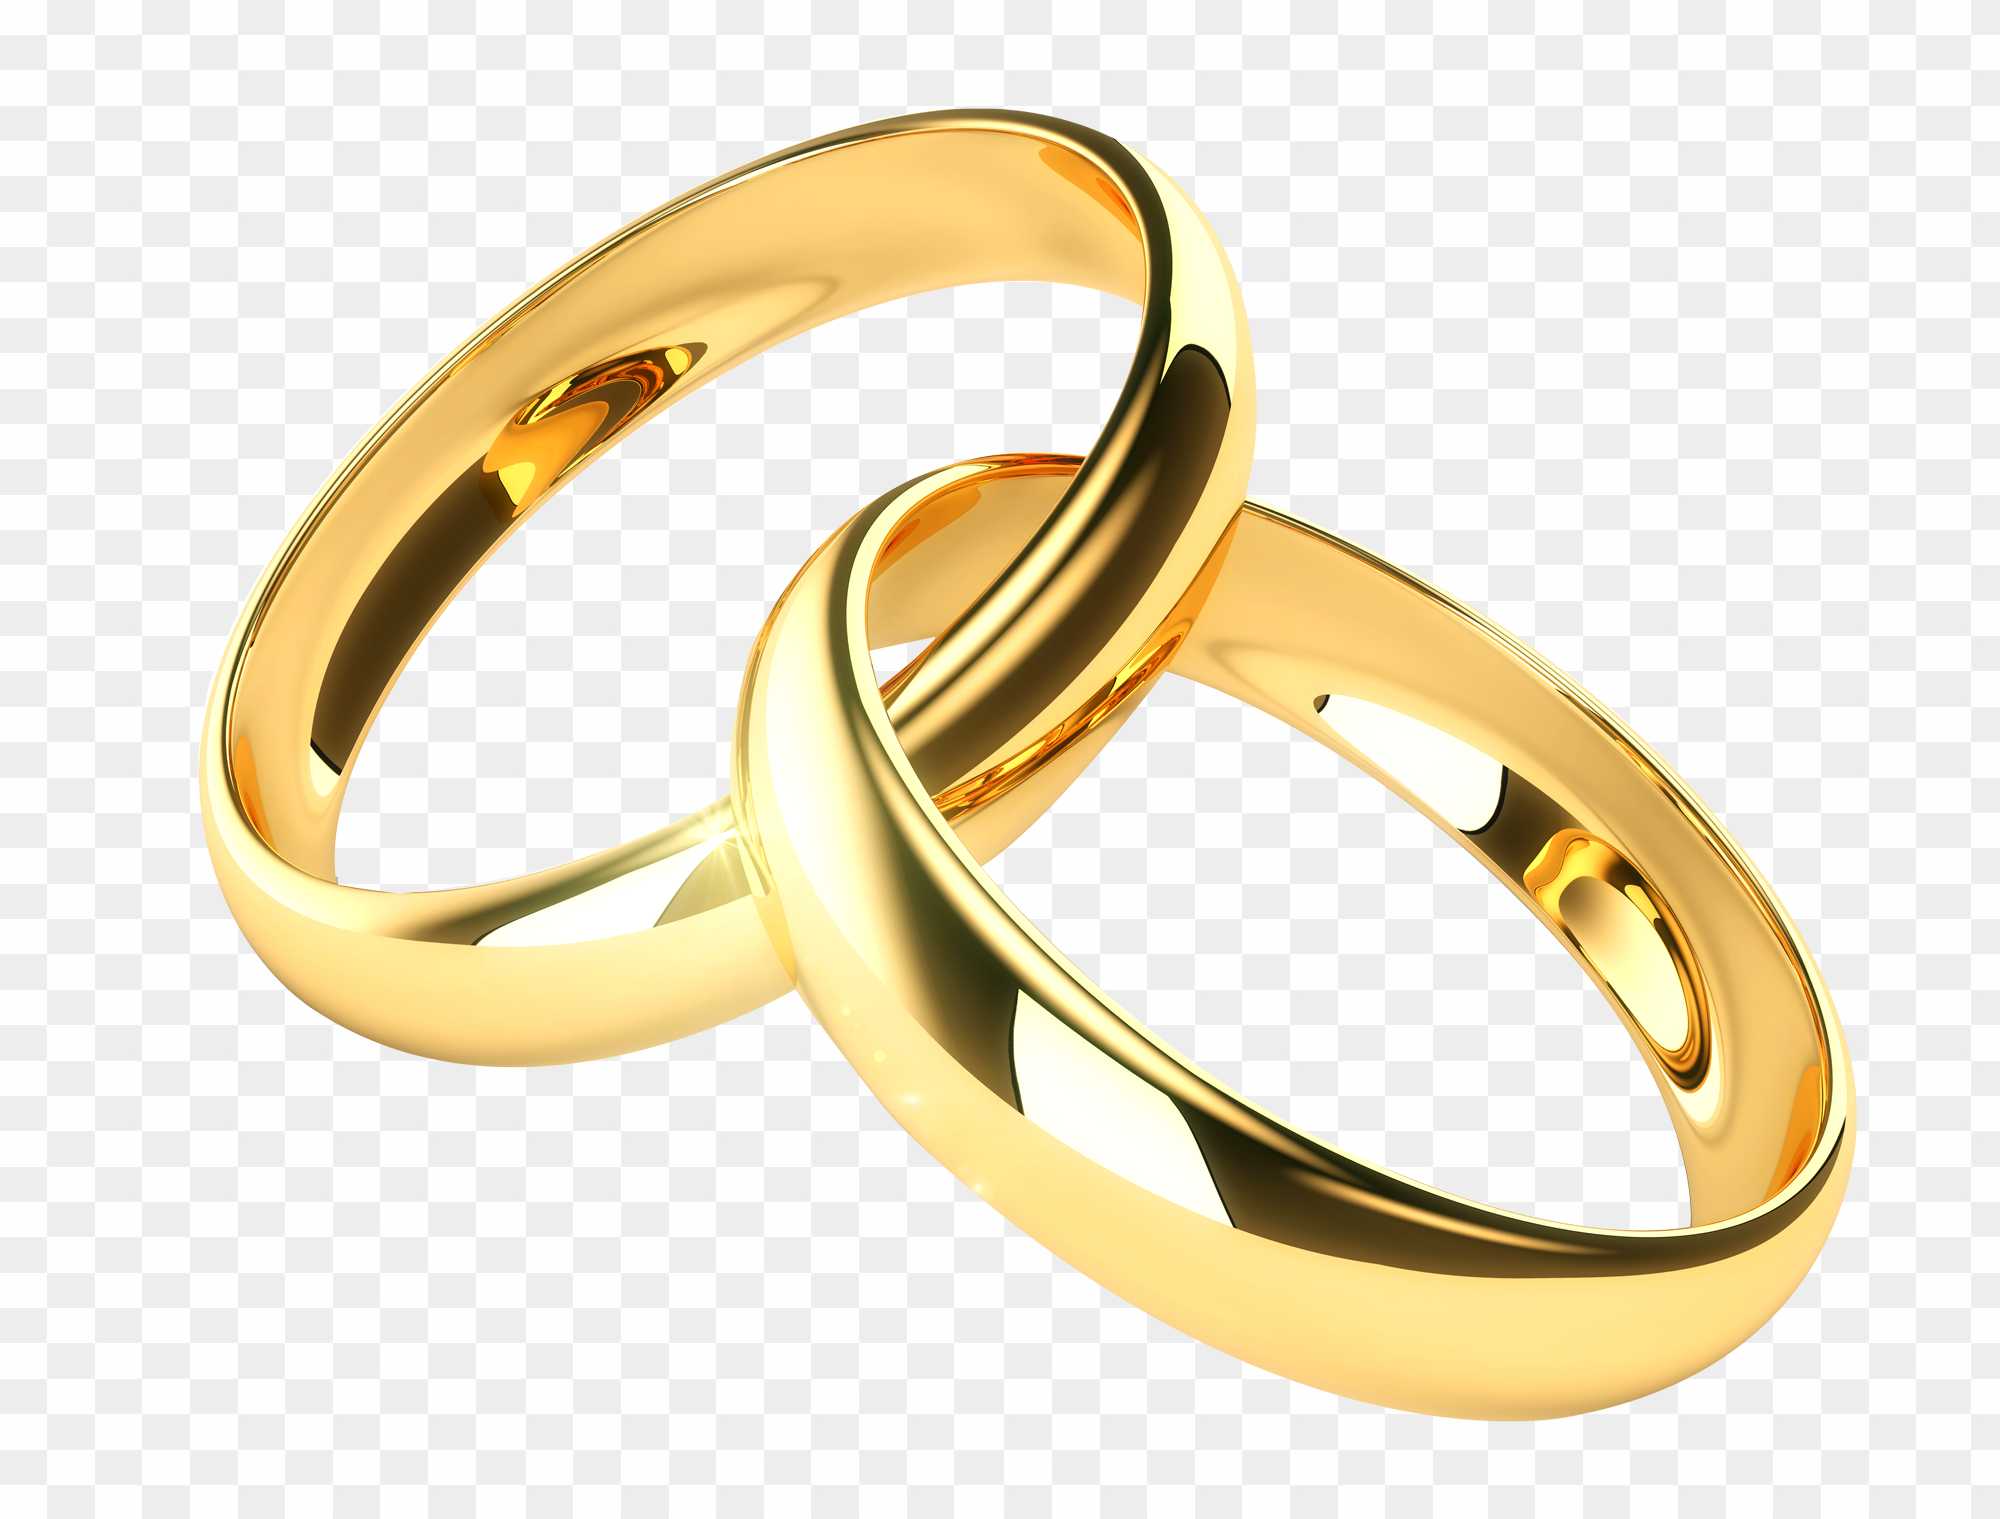 100,000 Wedding ring png Vector Images | Depositphotos